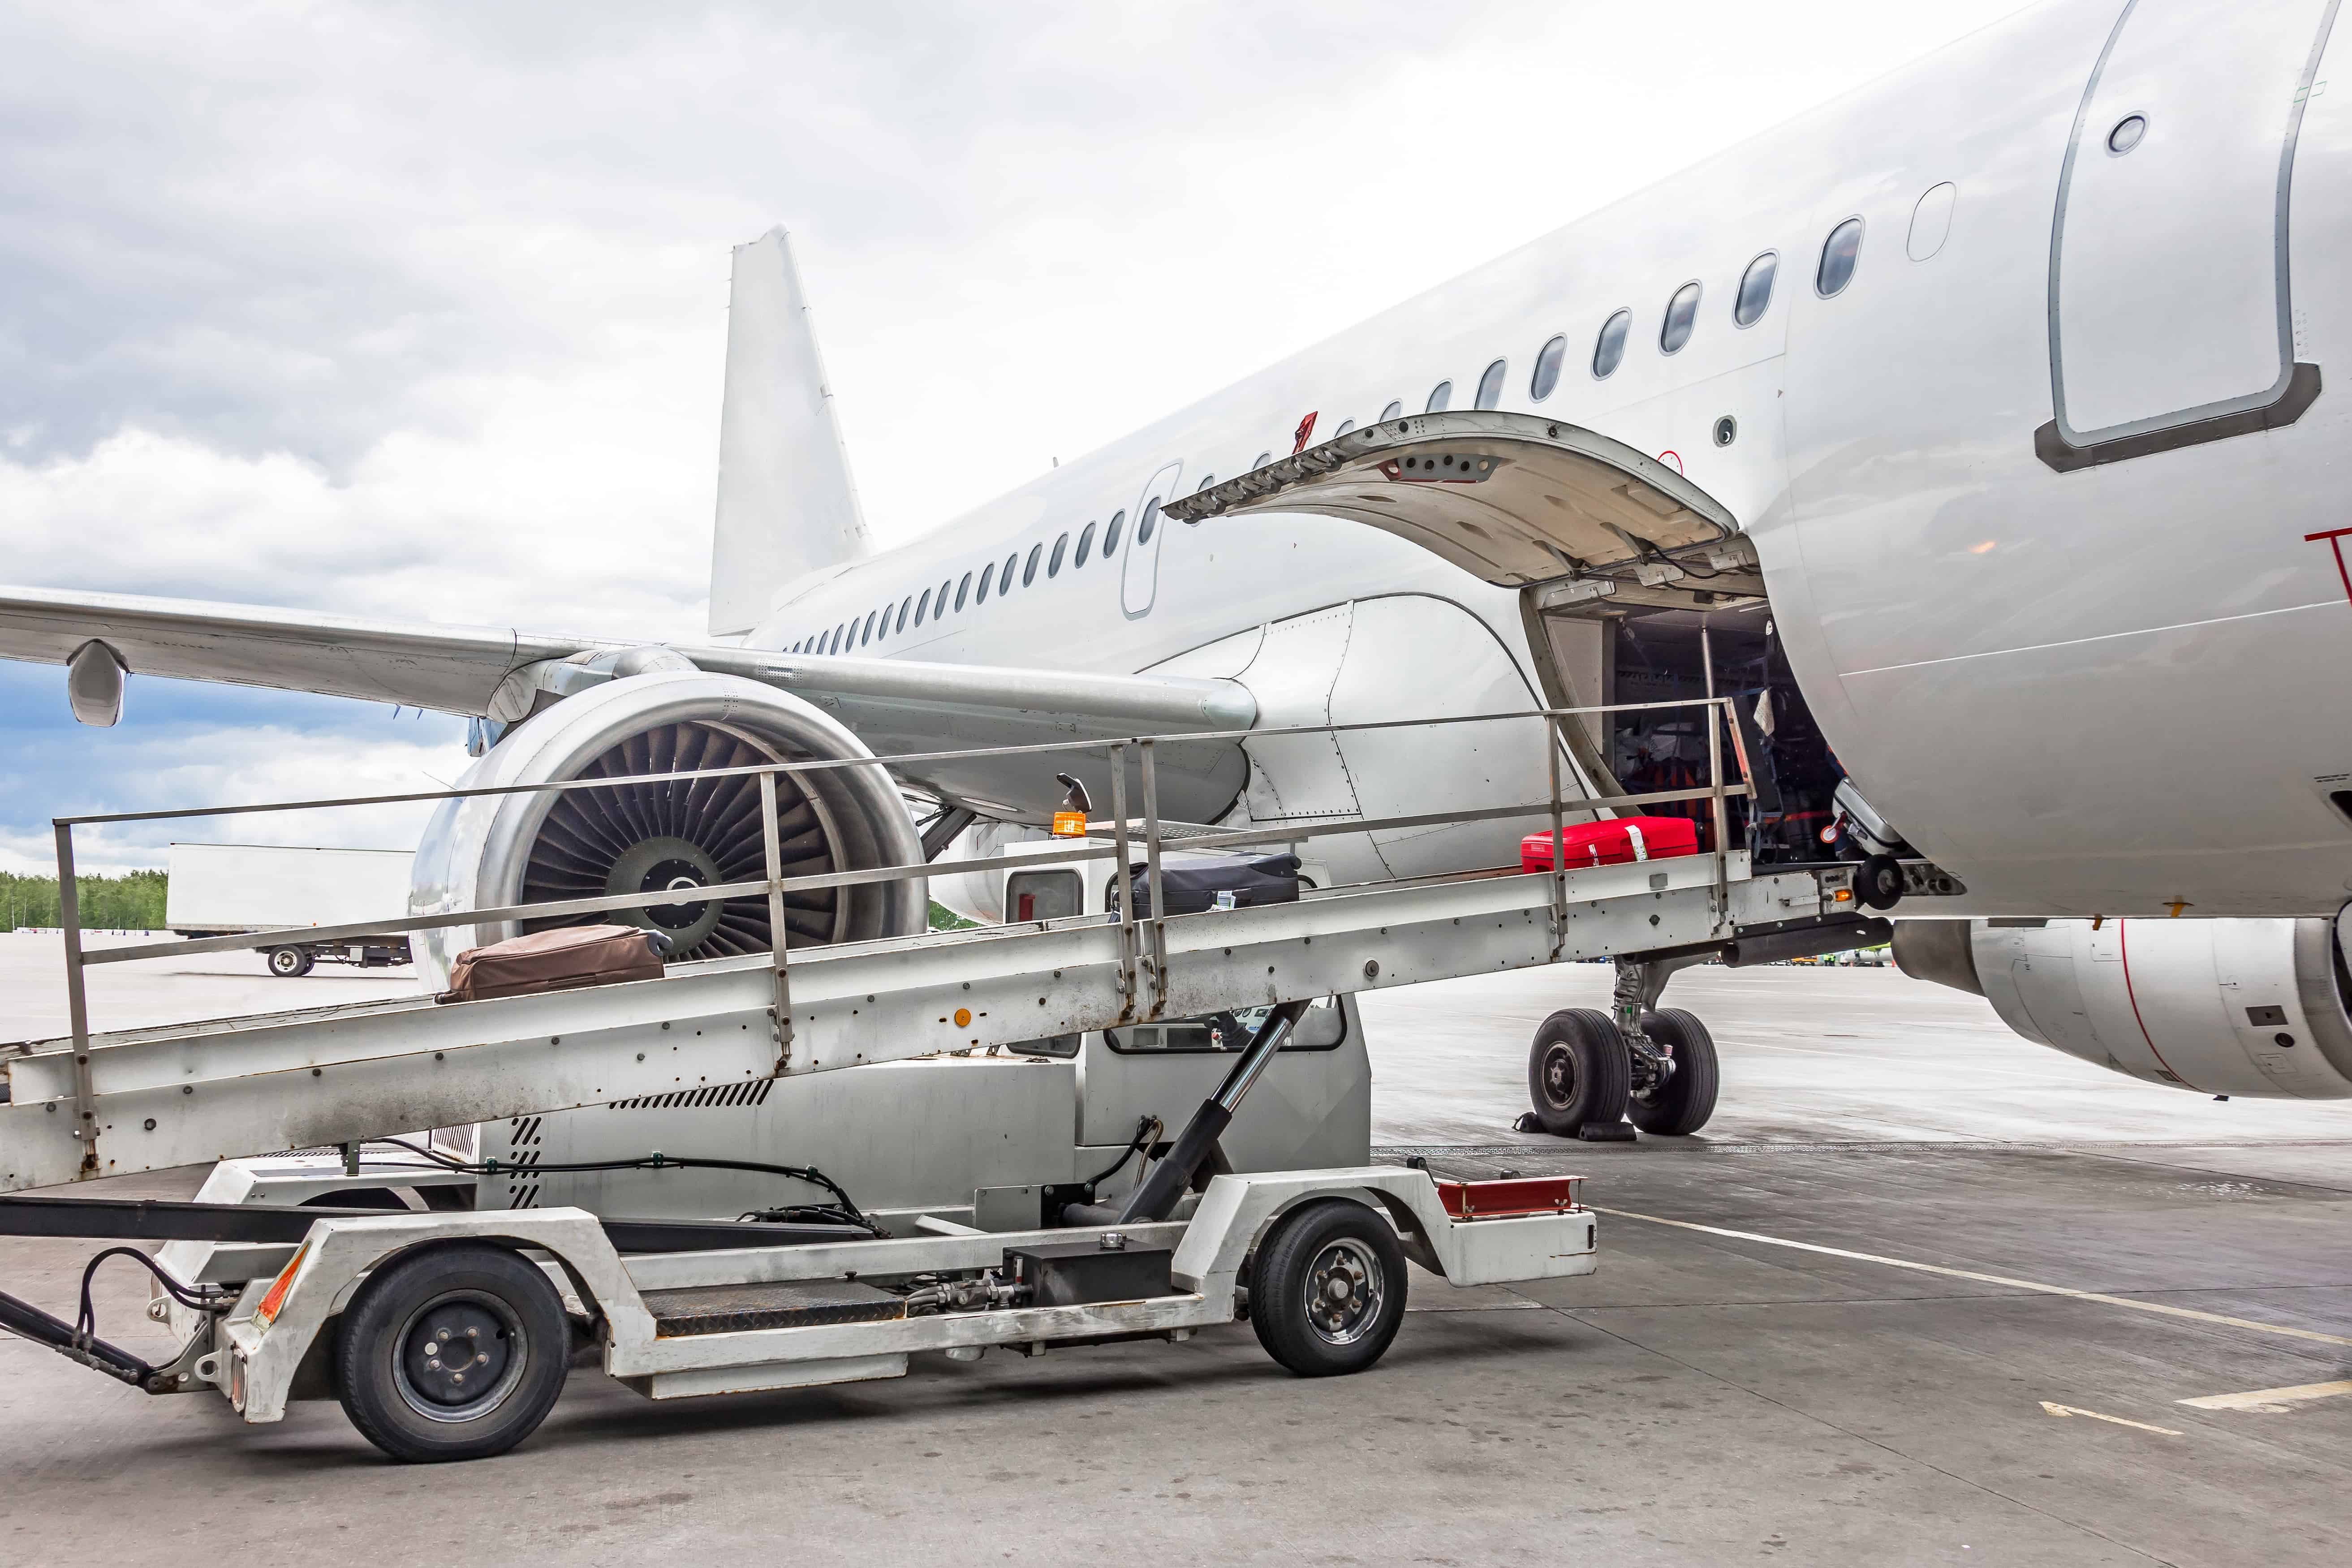 line-of-airplanes-on-tarmac-loading-bags